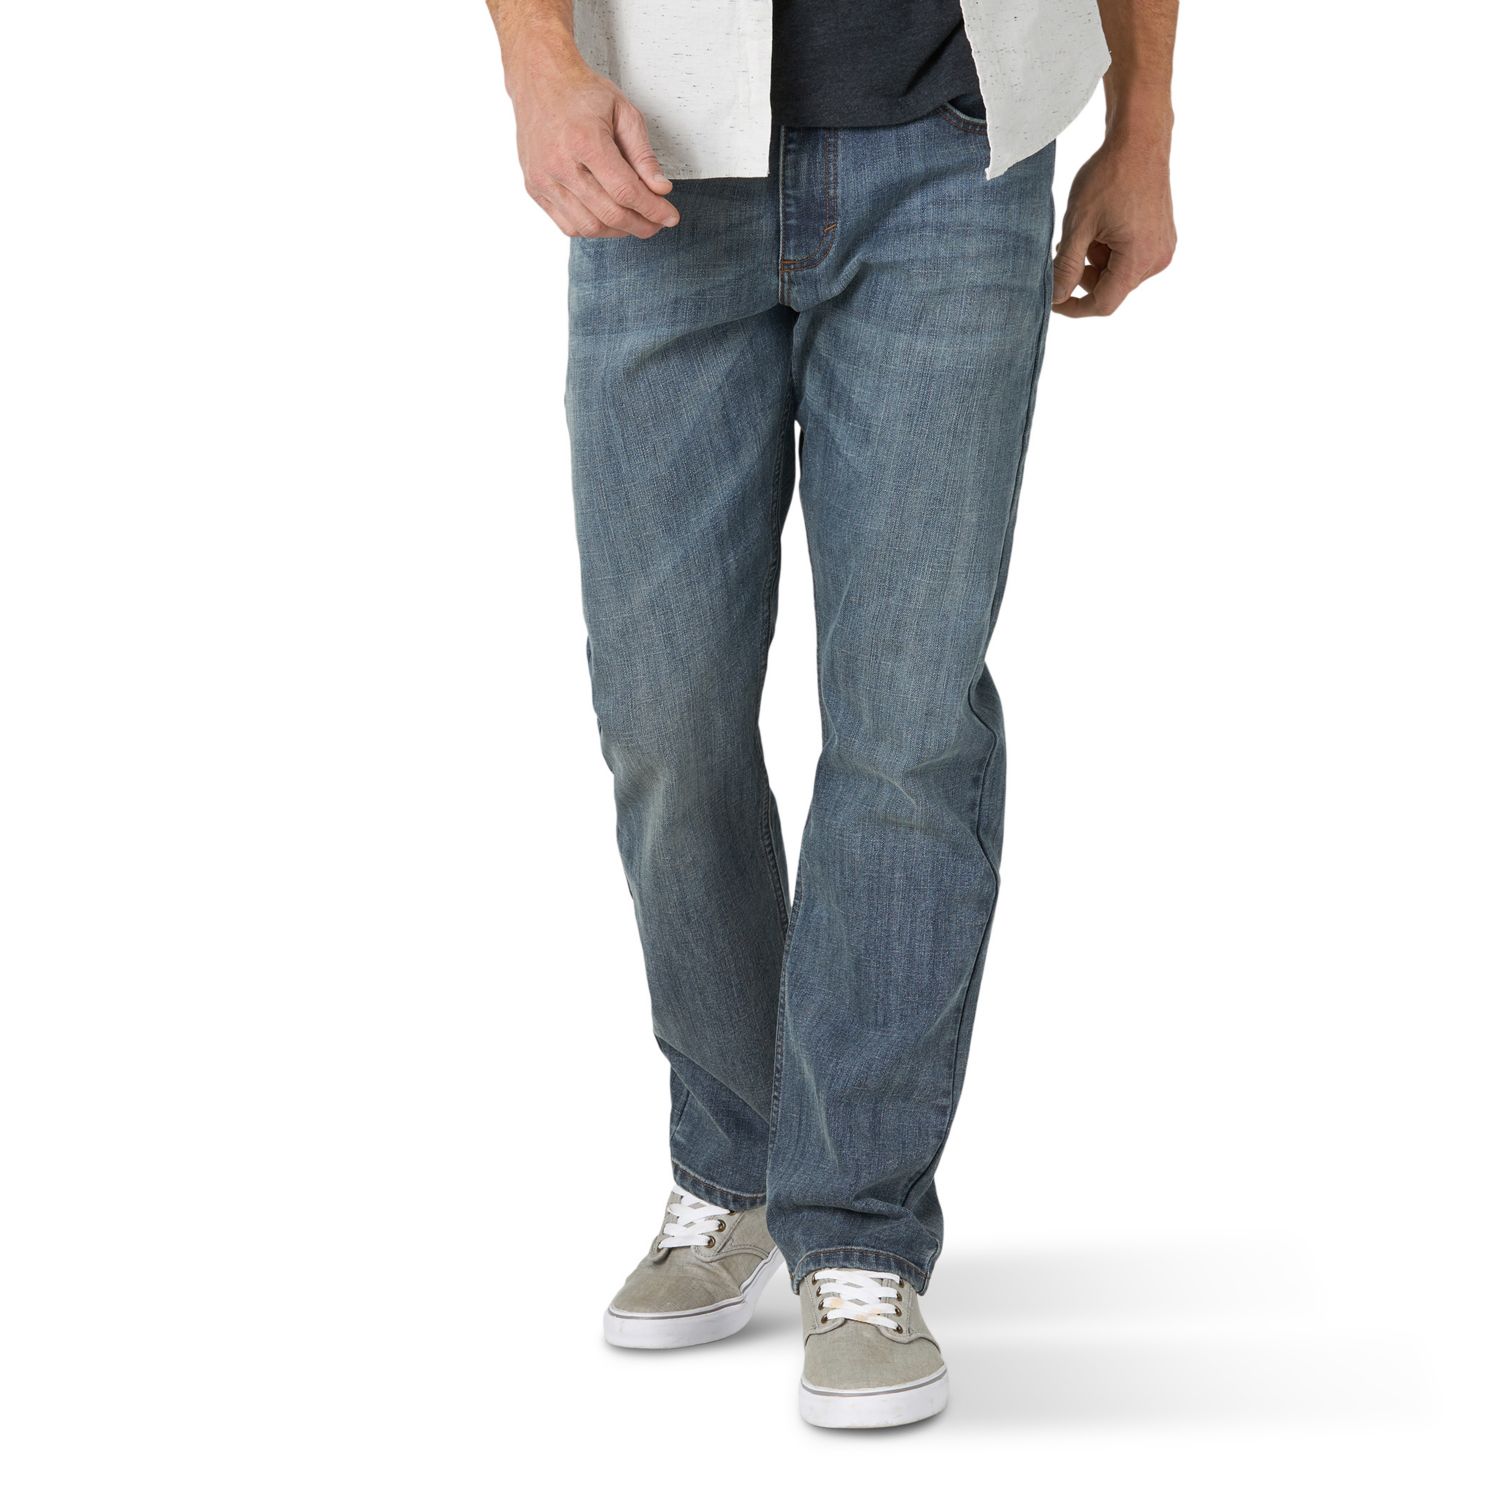 wrangler athletic fit jeans